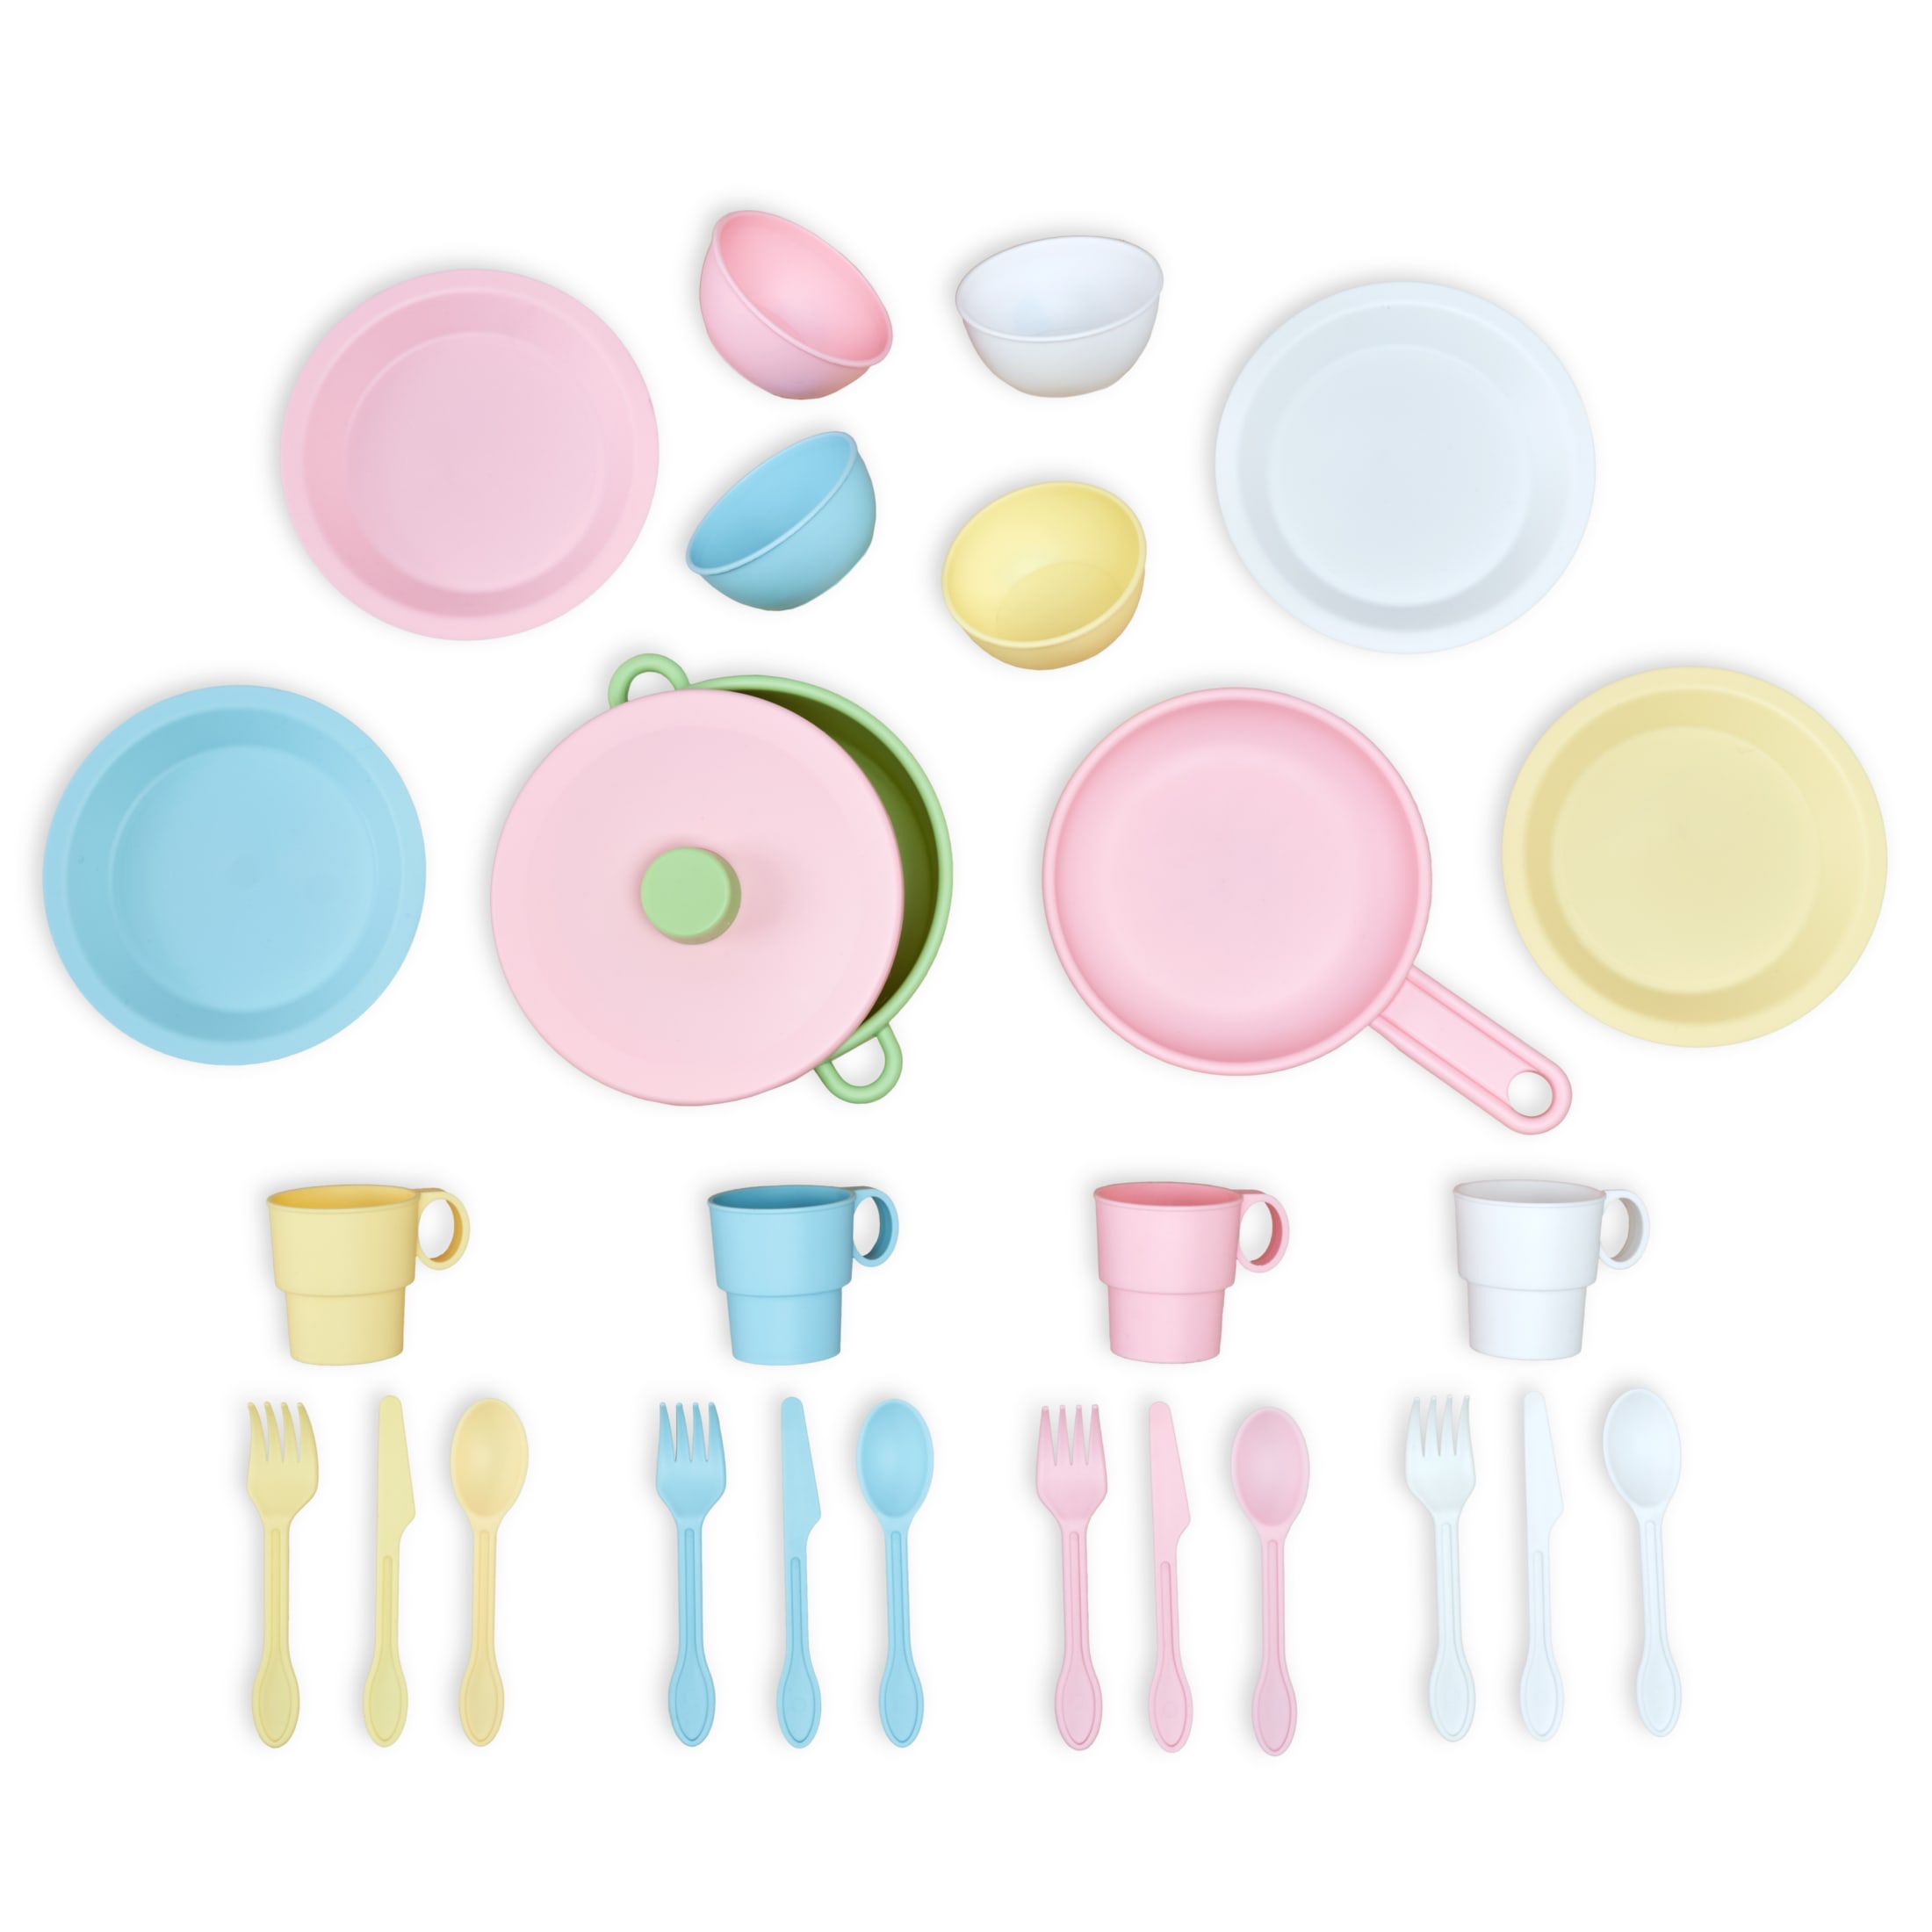 KidKraft 27-Piece Pastel Cookware Set, Plastic Dishes and Utensils for Play Kitchens - image 1 of 5